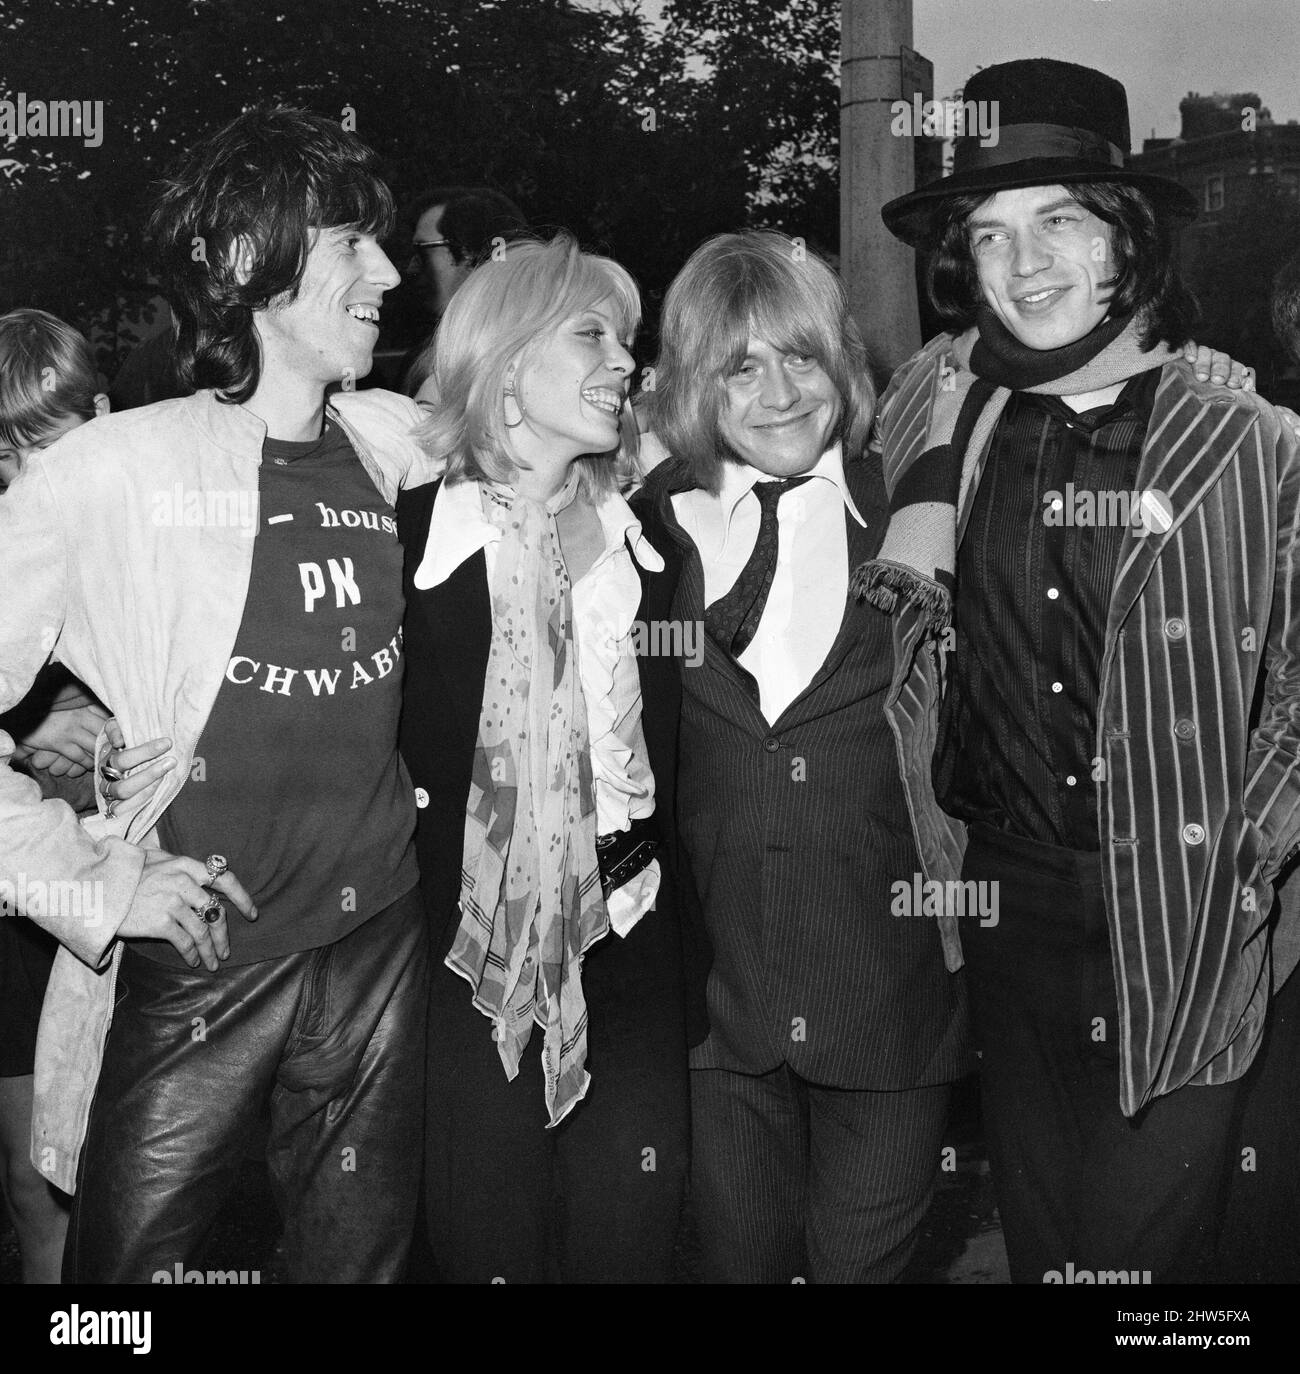 Brian Jones of the Rolling Stones pop group appears at the Inner London Sessions on drugs charges. Here he is pictured with girlfriend Suki Potier and bandmates Keith Richards (left) and Mick Jagger after being found guilty of possessing dangerous drugs and fined £50 plus costs. 26th September 1968. Stock Photo